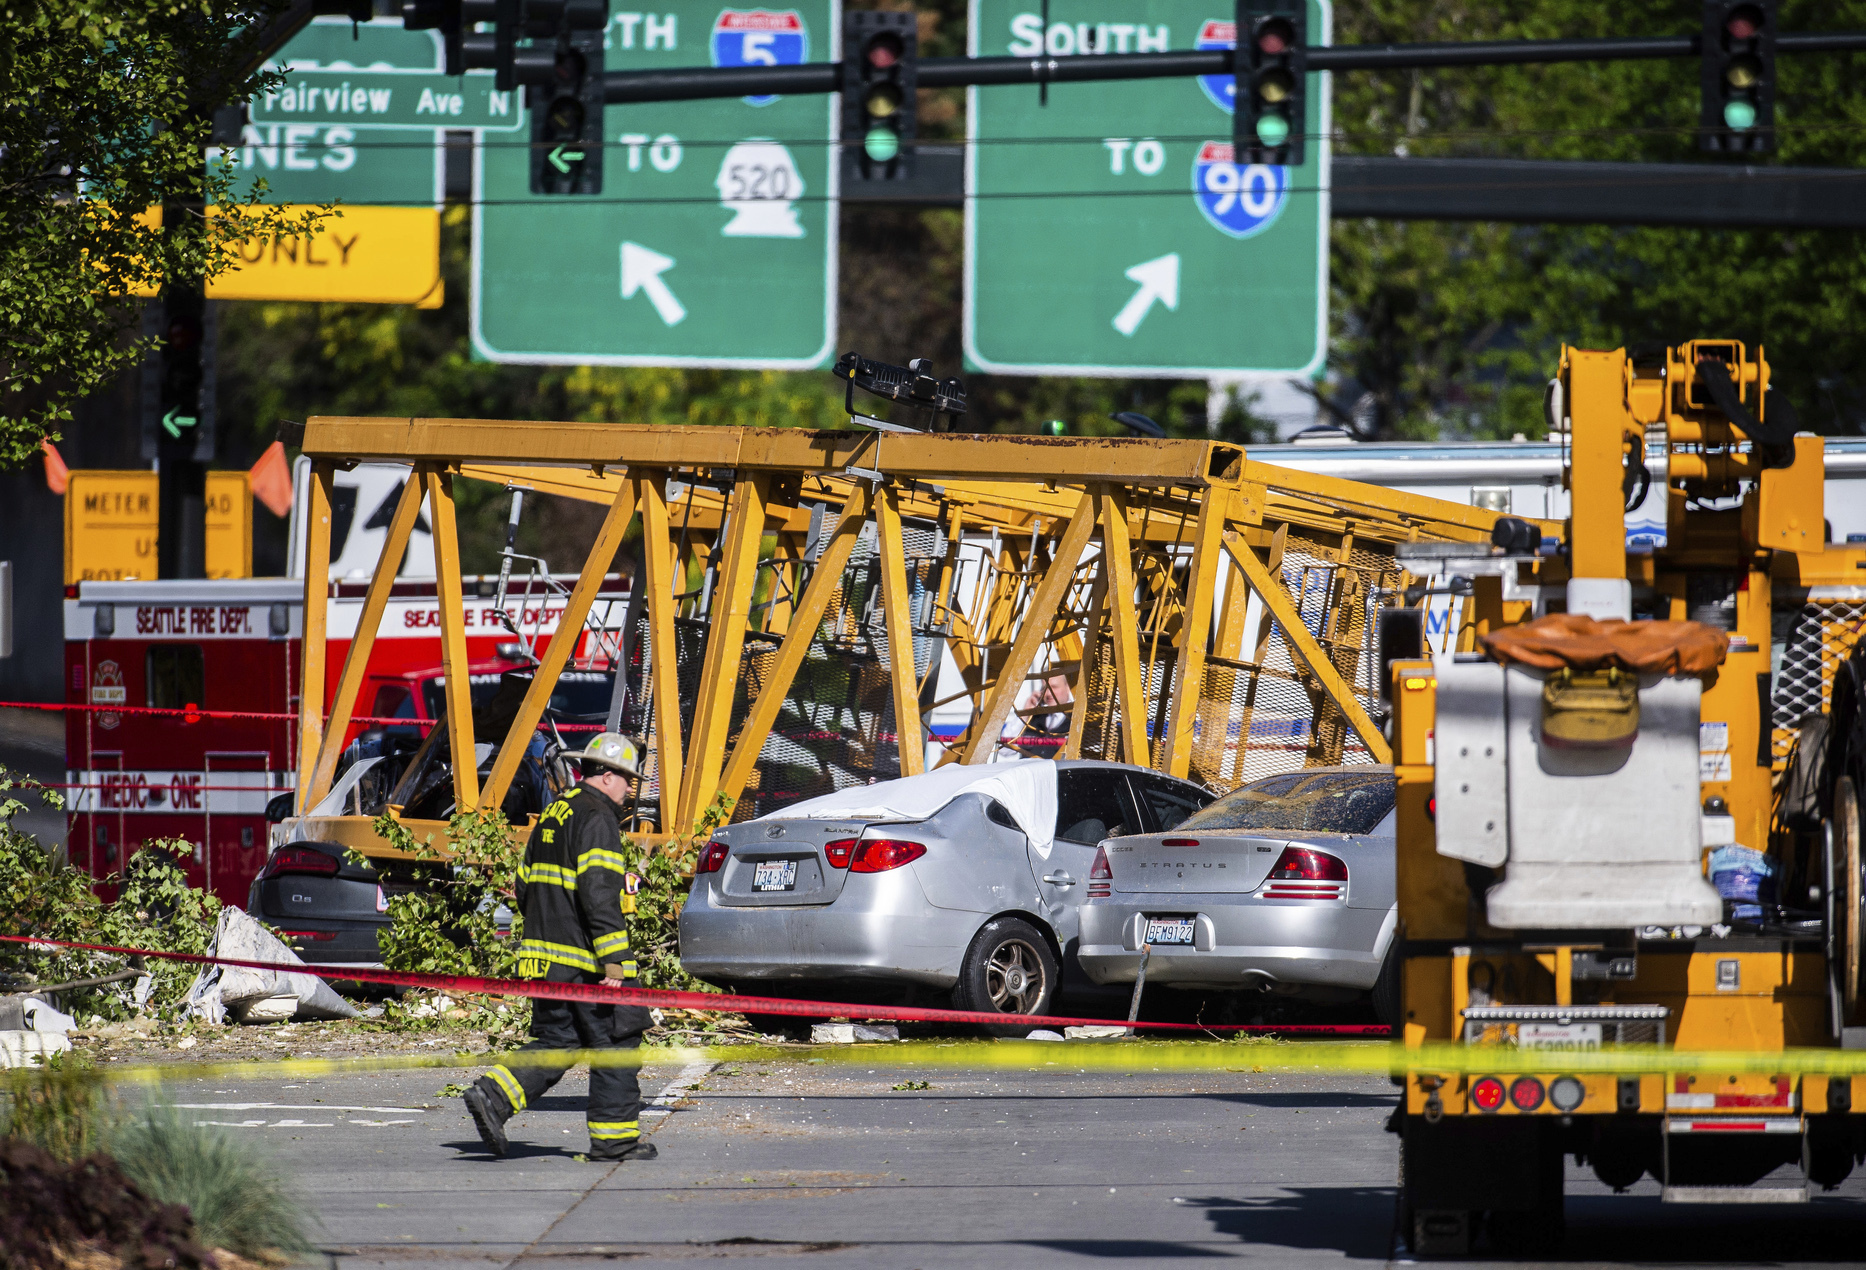 PHOTO: Emergency crews work the scene of a construction crane collapse near Interstate 5 in Seattle, on Saturday, April 27, 2019. The crane was atop an office building under construction in a densely populated area.